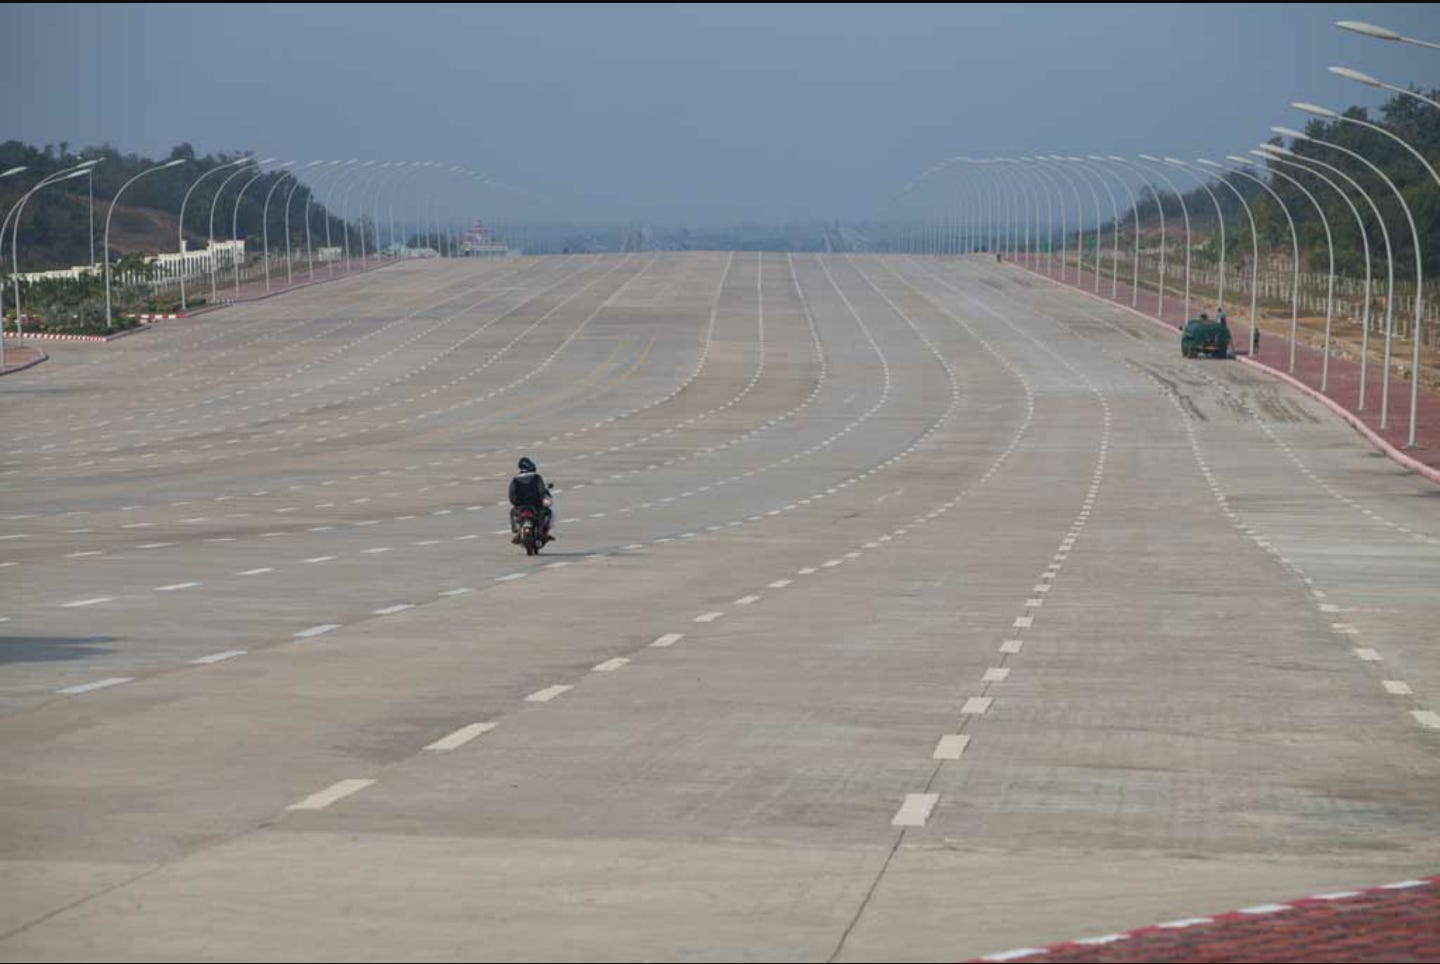 This 20 lane road in Naypyidaw, (Myanmar's new capital). It's like they  WANT their city to be congested by cars : r/fuckcars